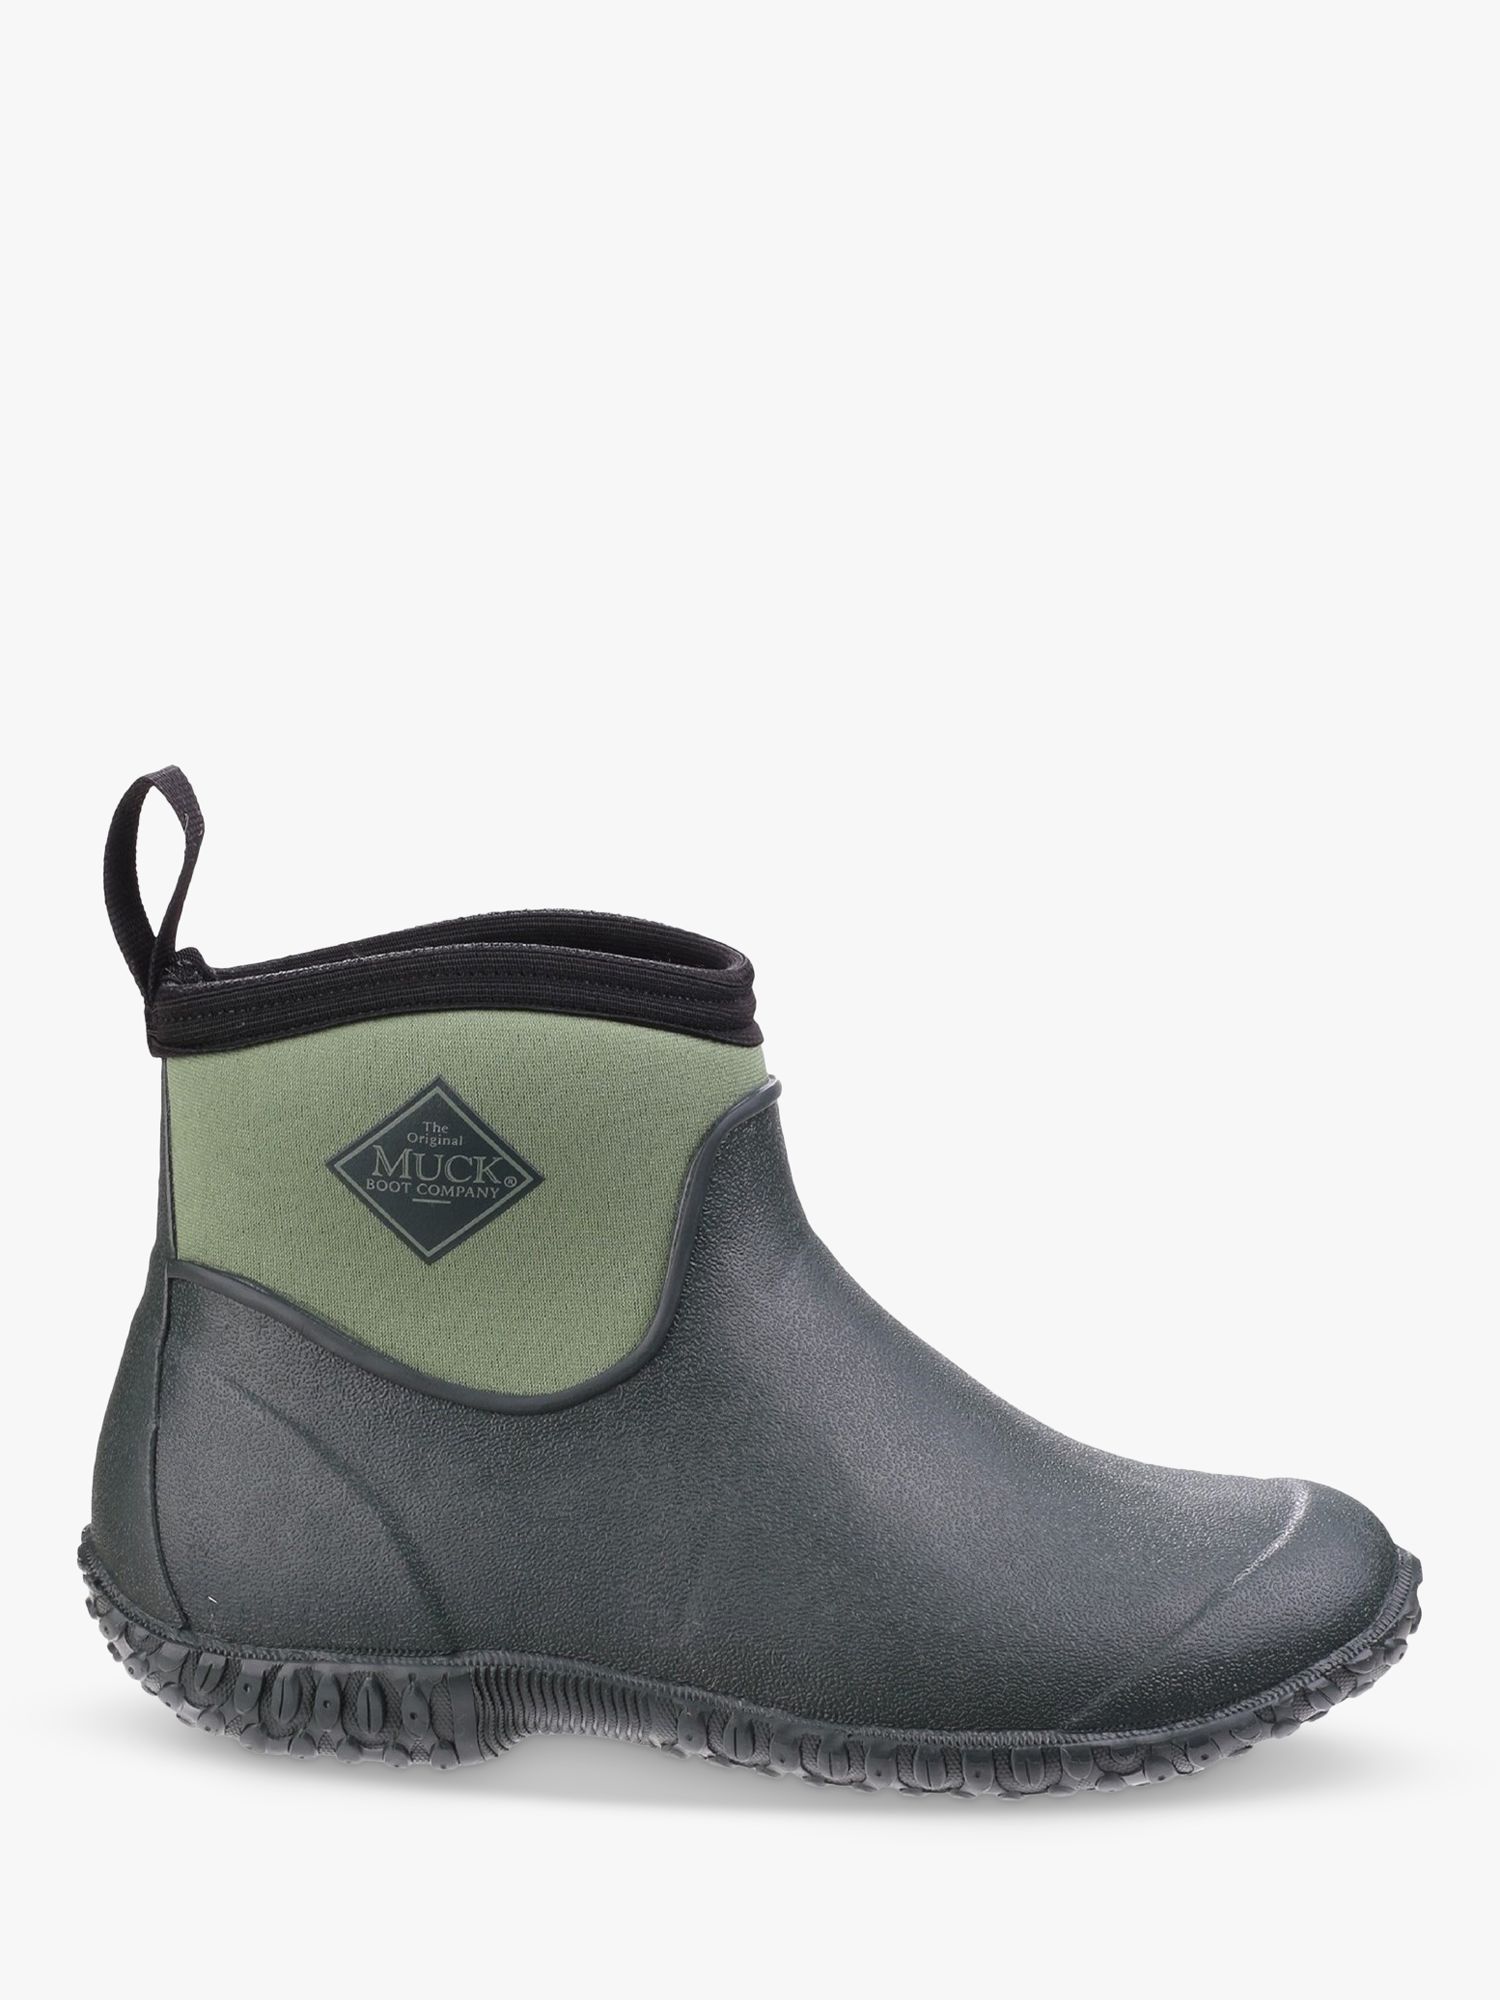 Muck Muckster II Ankle Wellington Boots, Green at John Lewis & Partners